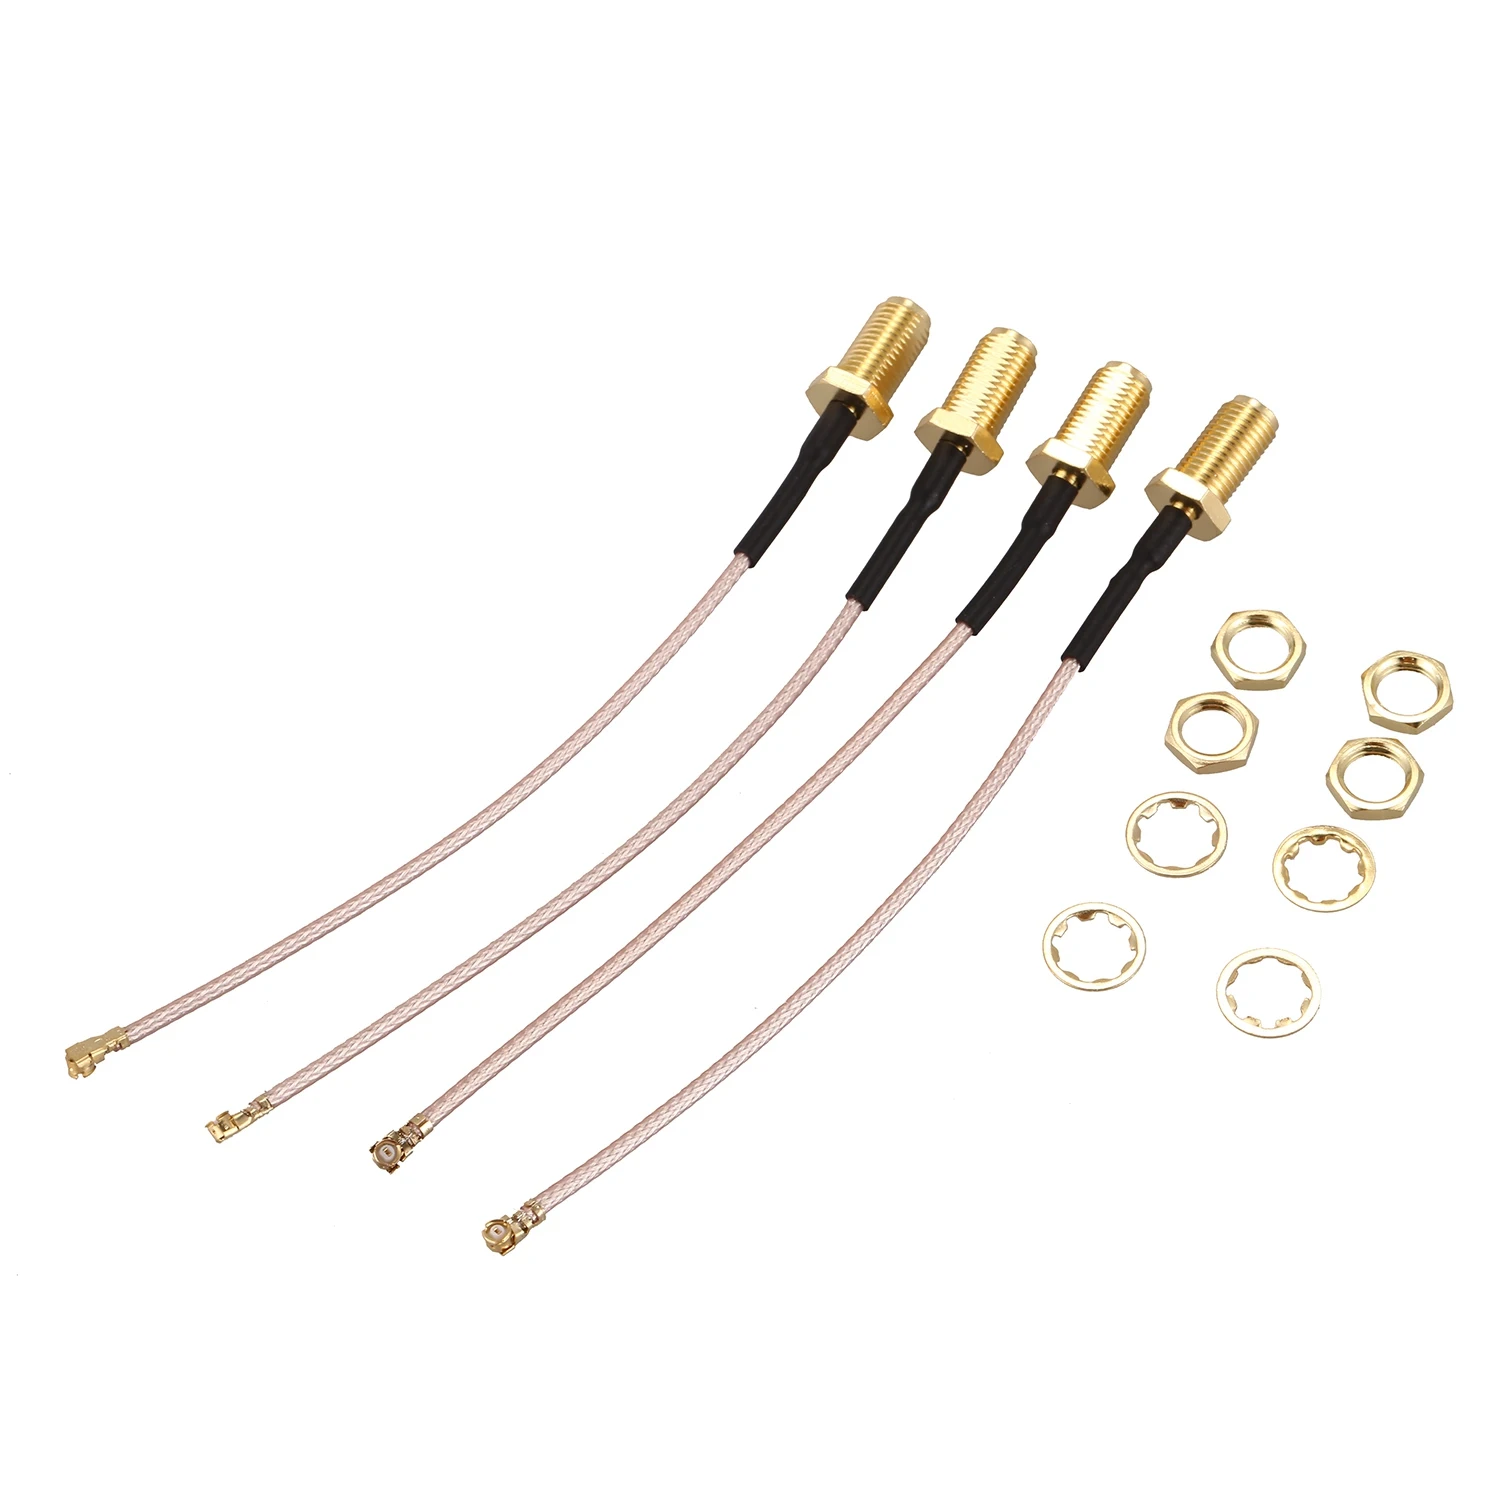 

Pack of 4 RF U.FL(IPEX/IPX) Mini PCI to RP-SMA Female Pigtail Antenna Wi-Fi Coaxial RG-178 Low Loss Cable (4 inch (10 cm))